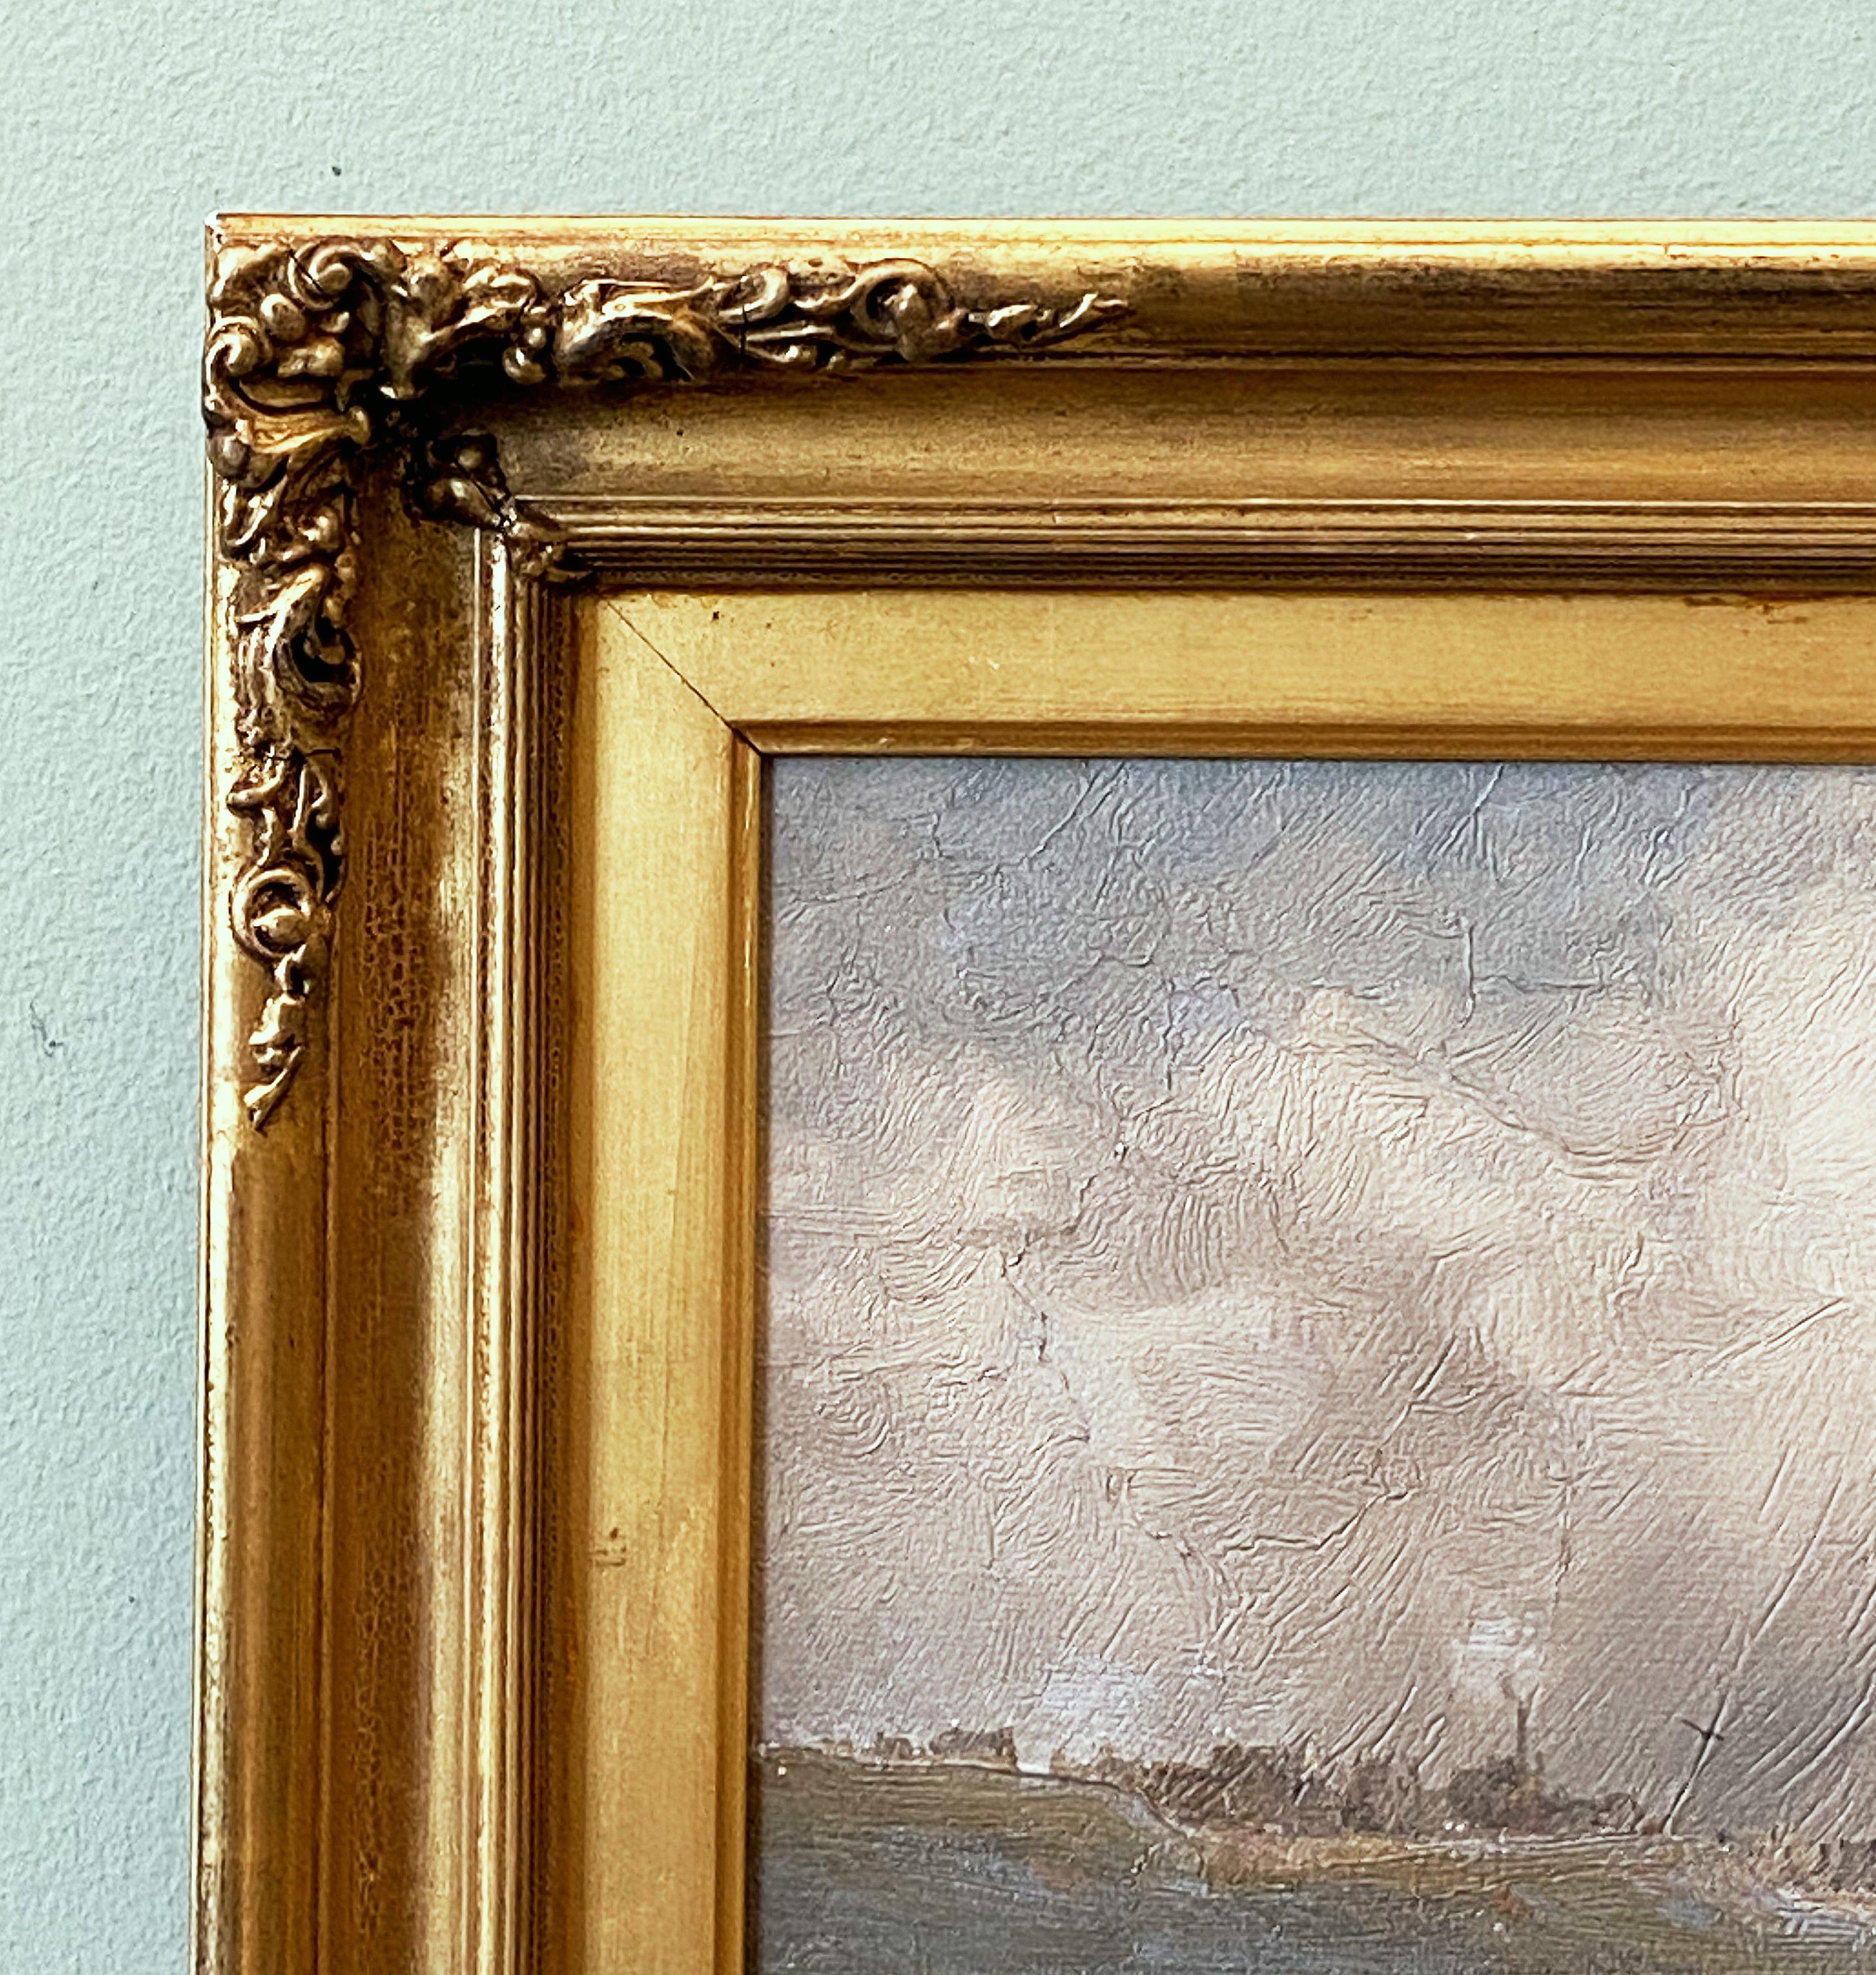 Canvas English Oil Painting Seascape or Ocean Scene with Ship in Gilt Frame